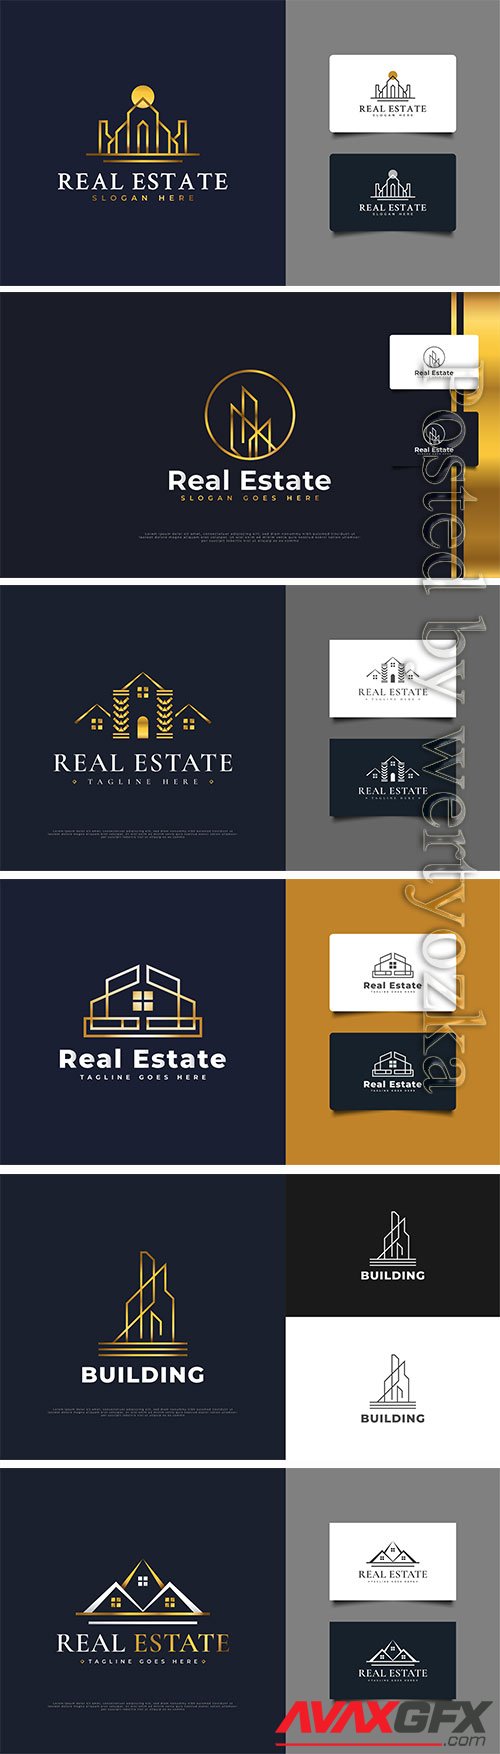 Luxury real estate logo vector design in white and gold